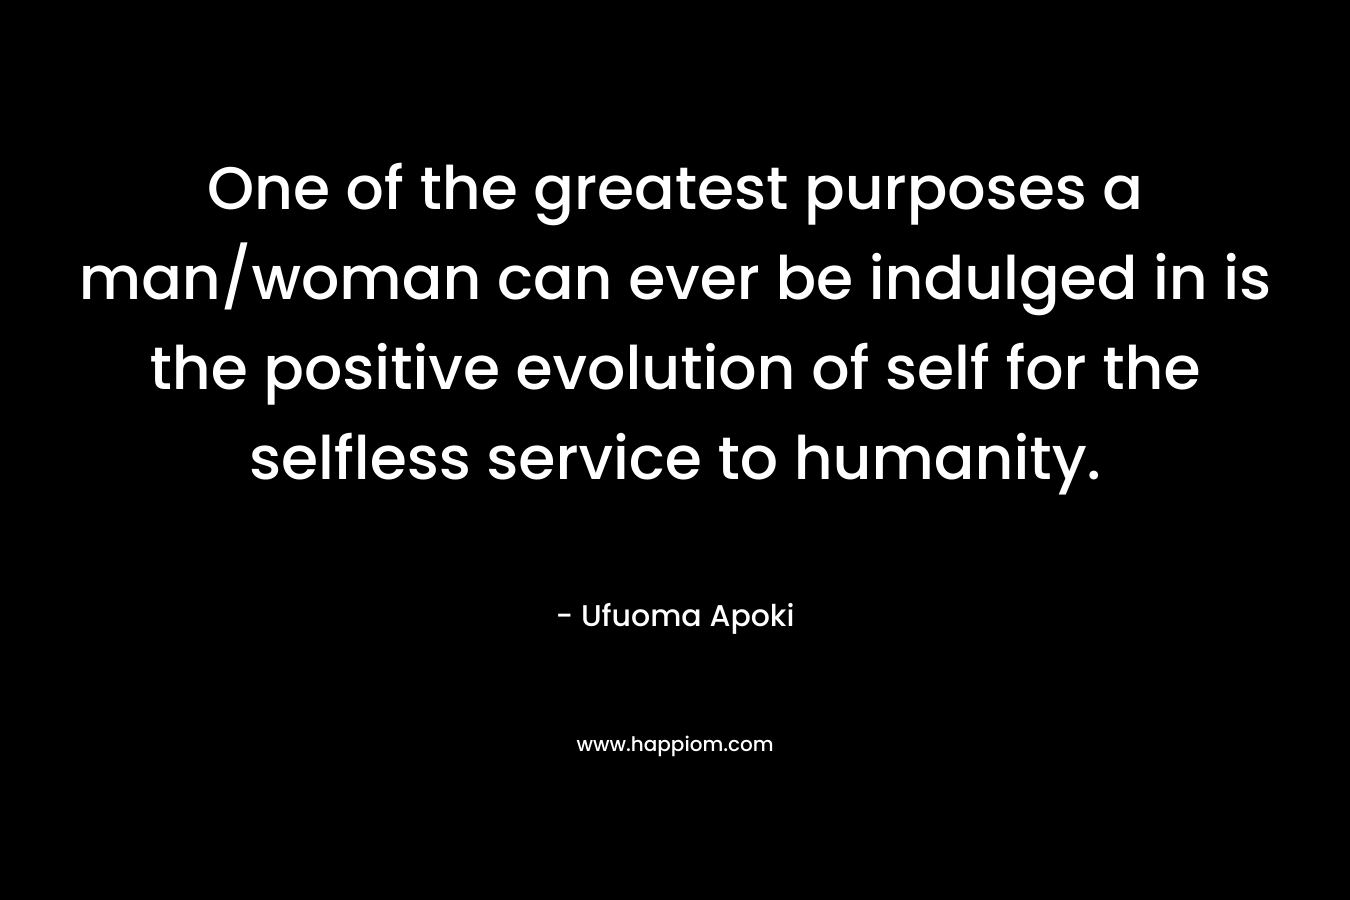 One of the greatest purposes a man/woman can ever be indulged in is the positive evolution of self for the selfless service to humanity.